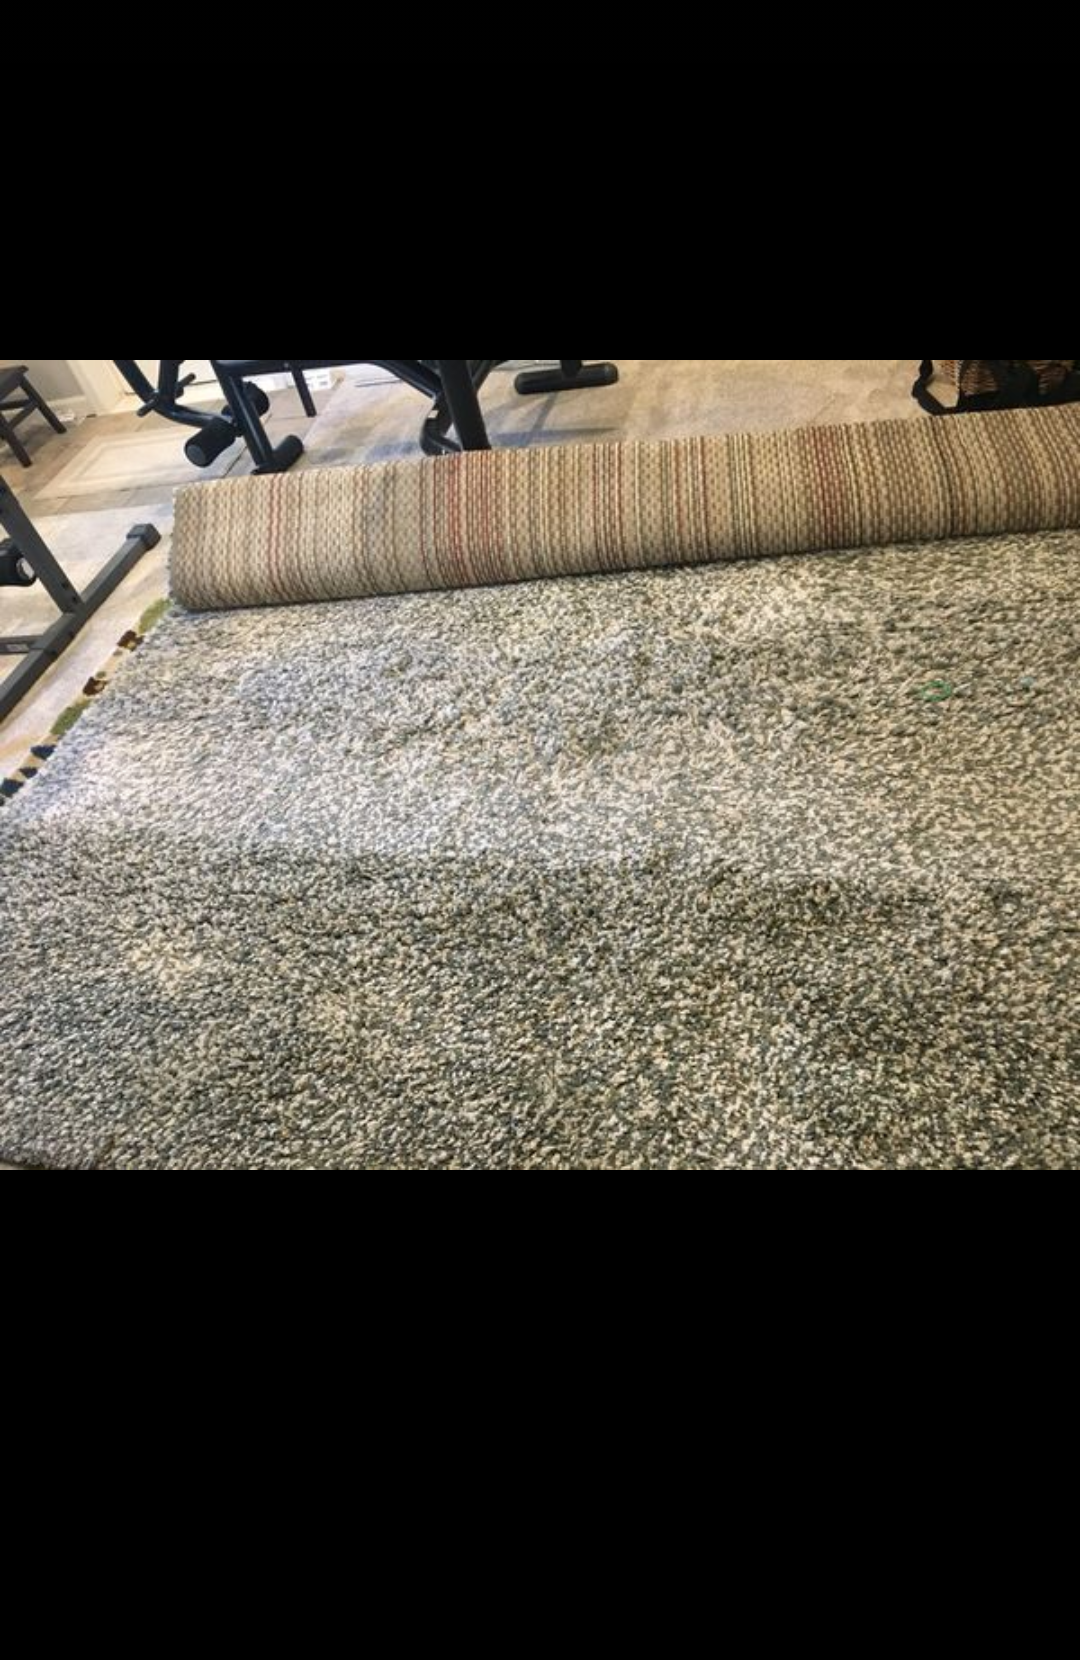 Large Area Rug 8x11